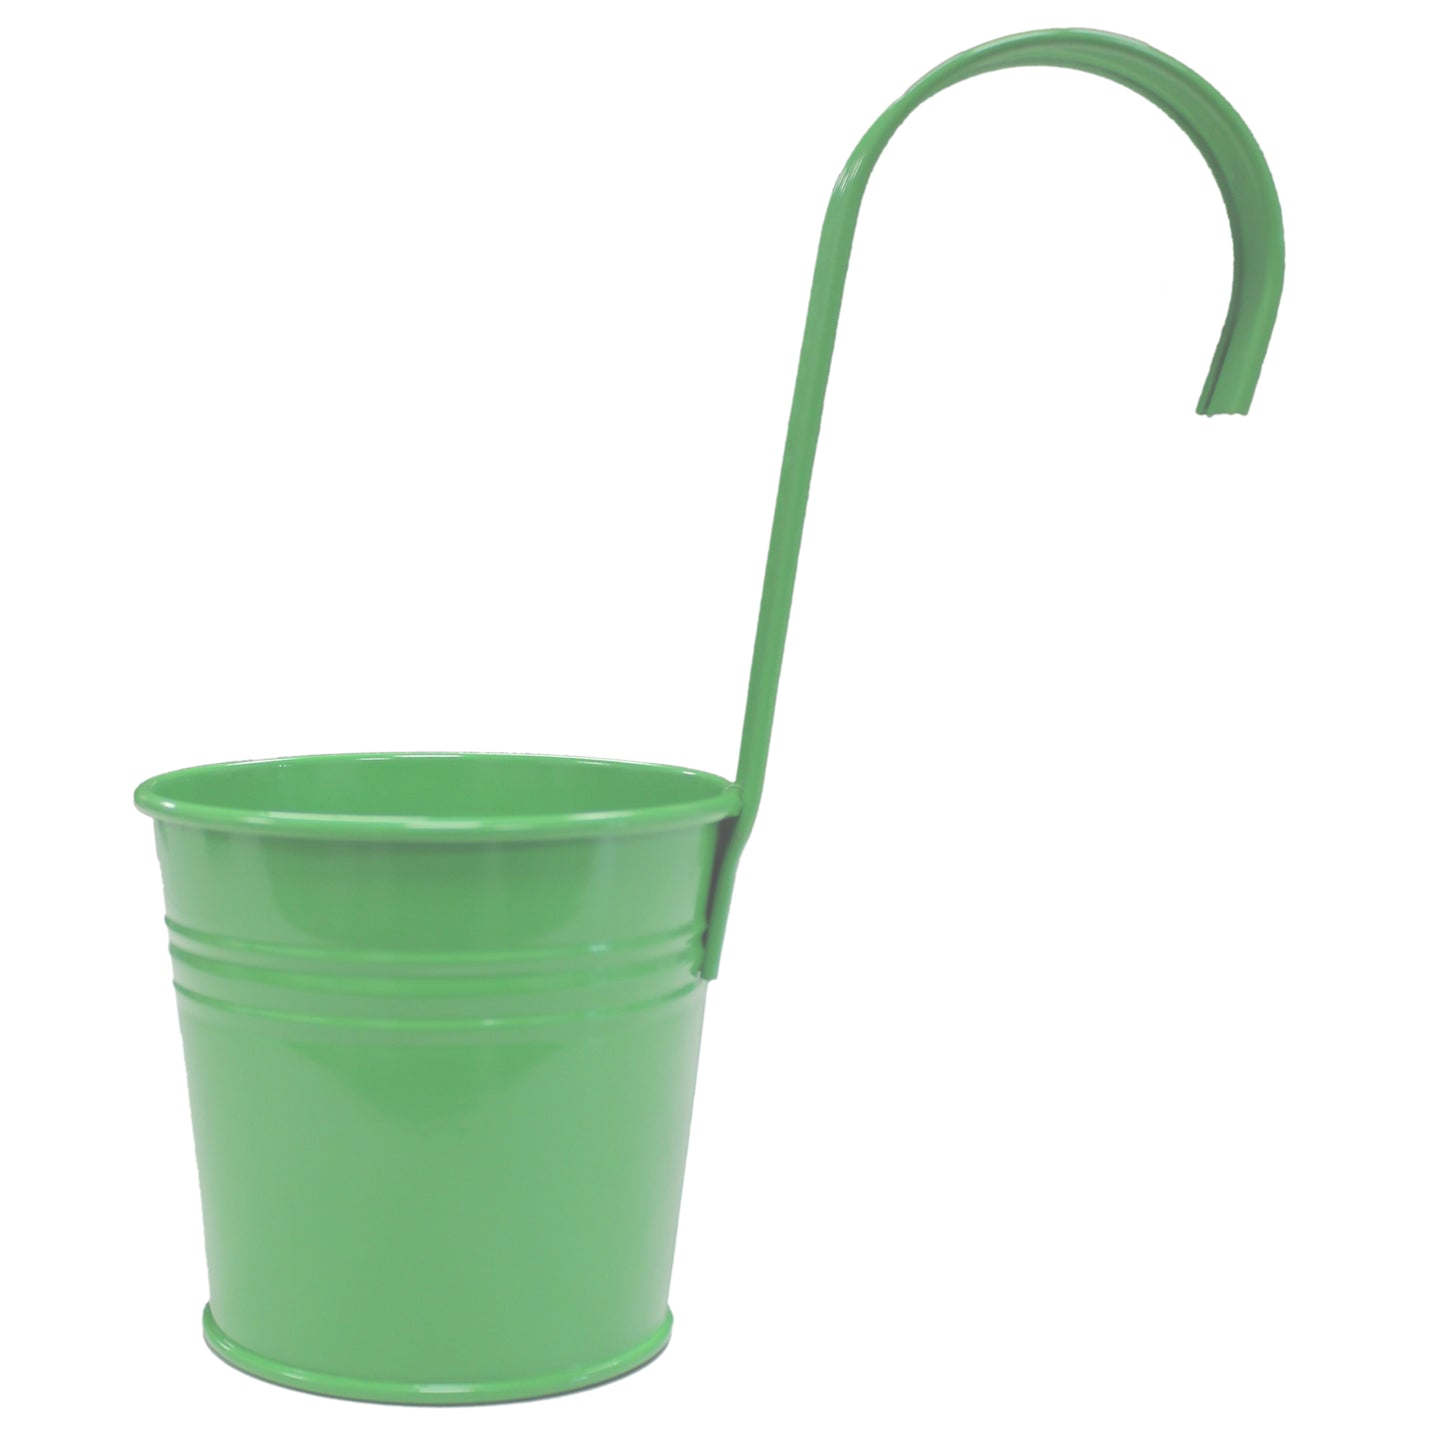 Garden Hanging Pots and Planters  - 11 Colours, 3 Sizes Available